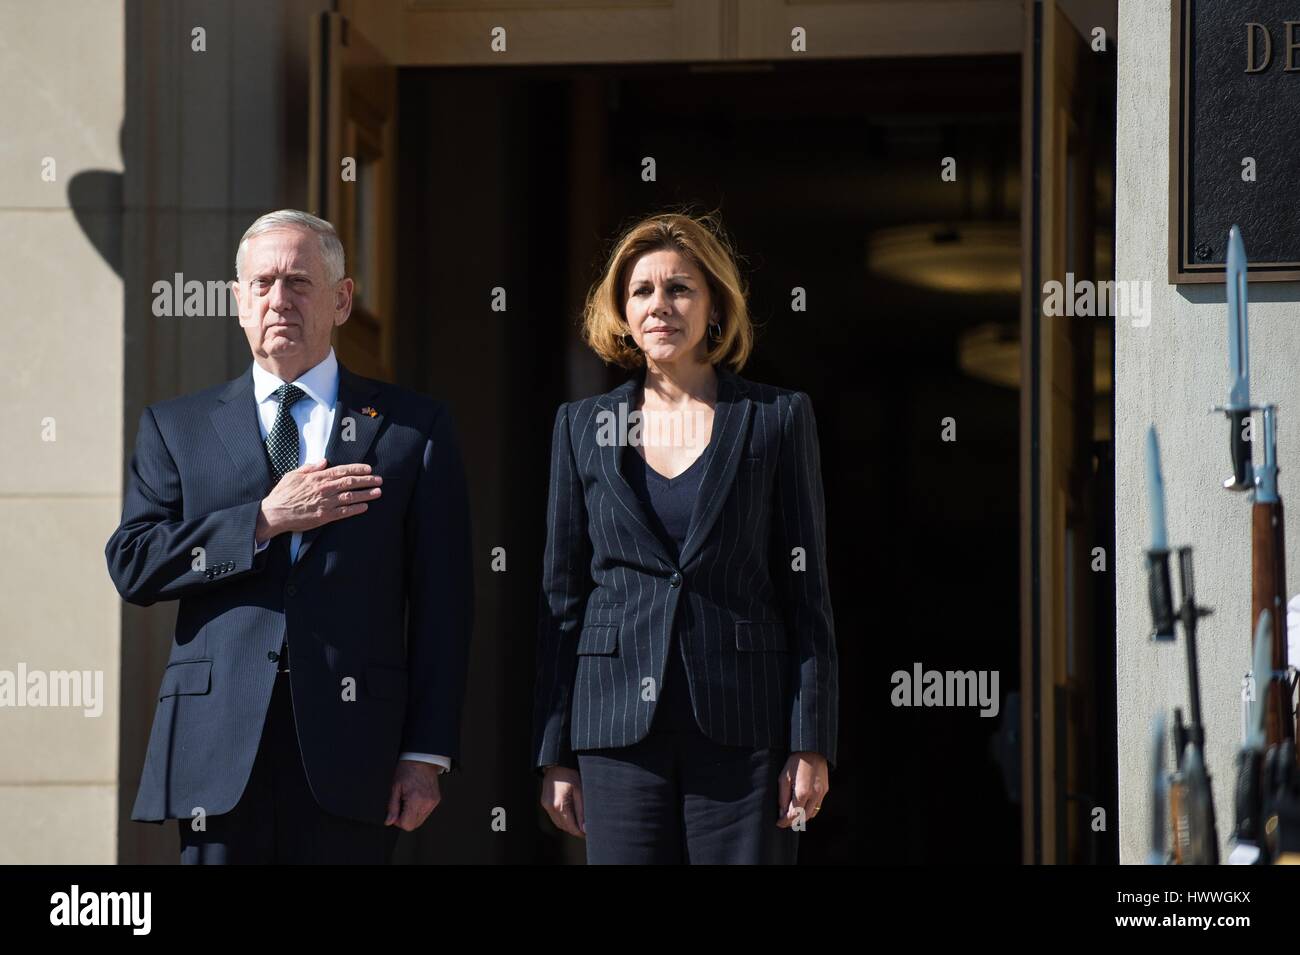 Arlington, Virginia, USA. 23rd March 2017. U.S. Secretary of Defense Jim Mattis stands with Spanish Defense Minister Maria Dolores de Cospedal during an honor guard ceremony prior to their bilateral meeting at the Pentagon March 23, 2017 in Arlington, Virginia. Credit: Planetpix/Alamy Live News Stock Photo